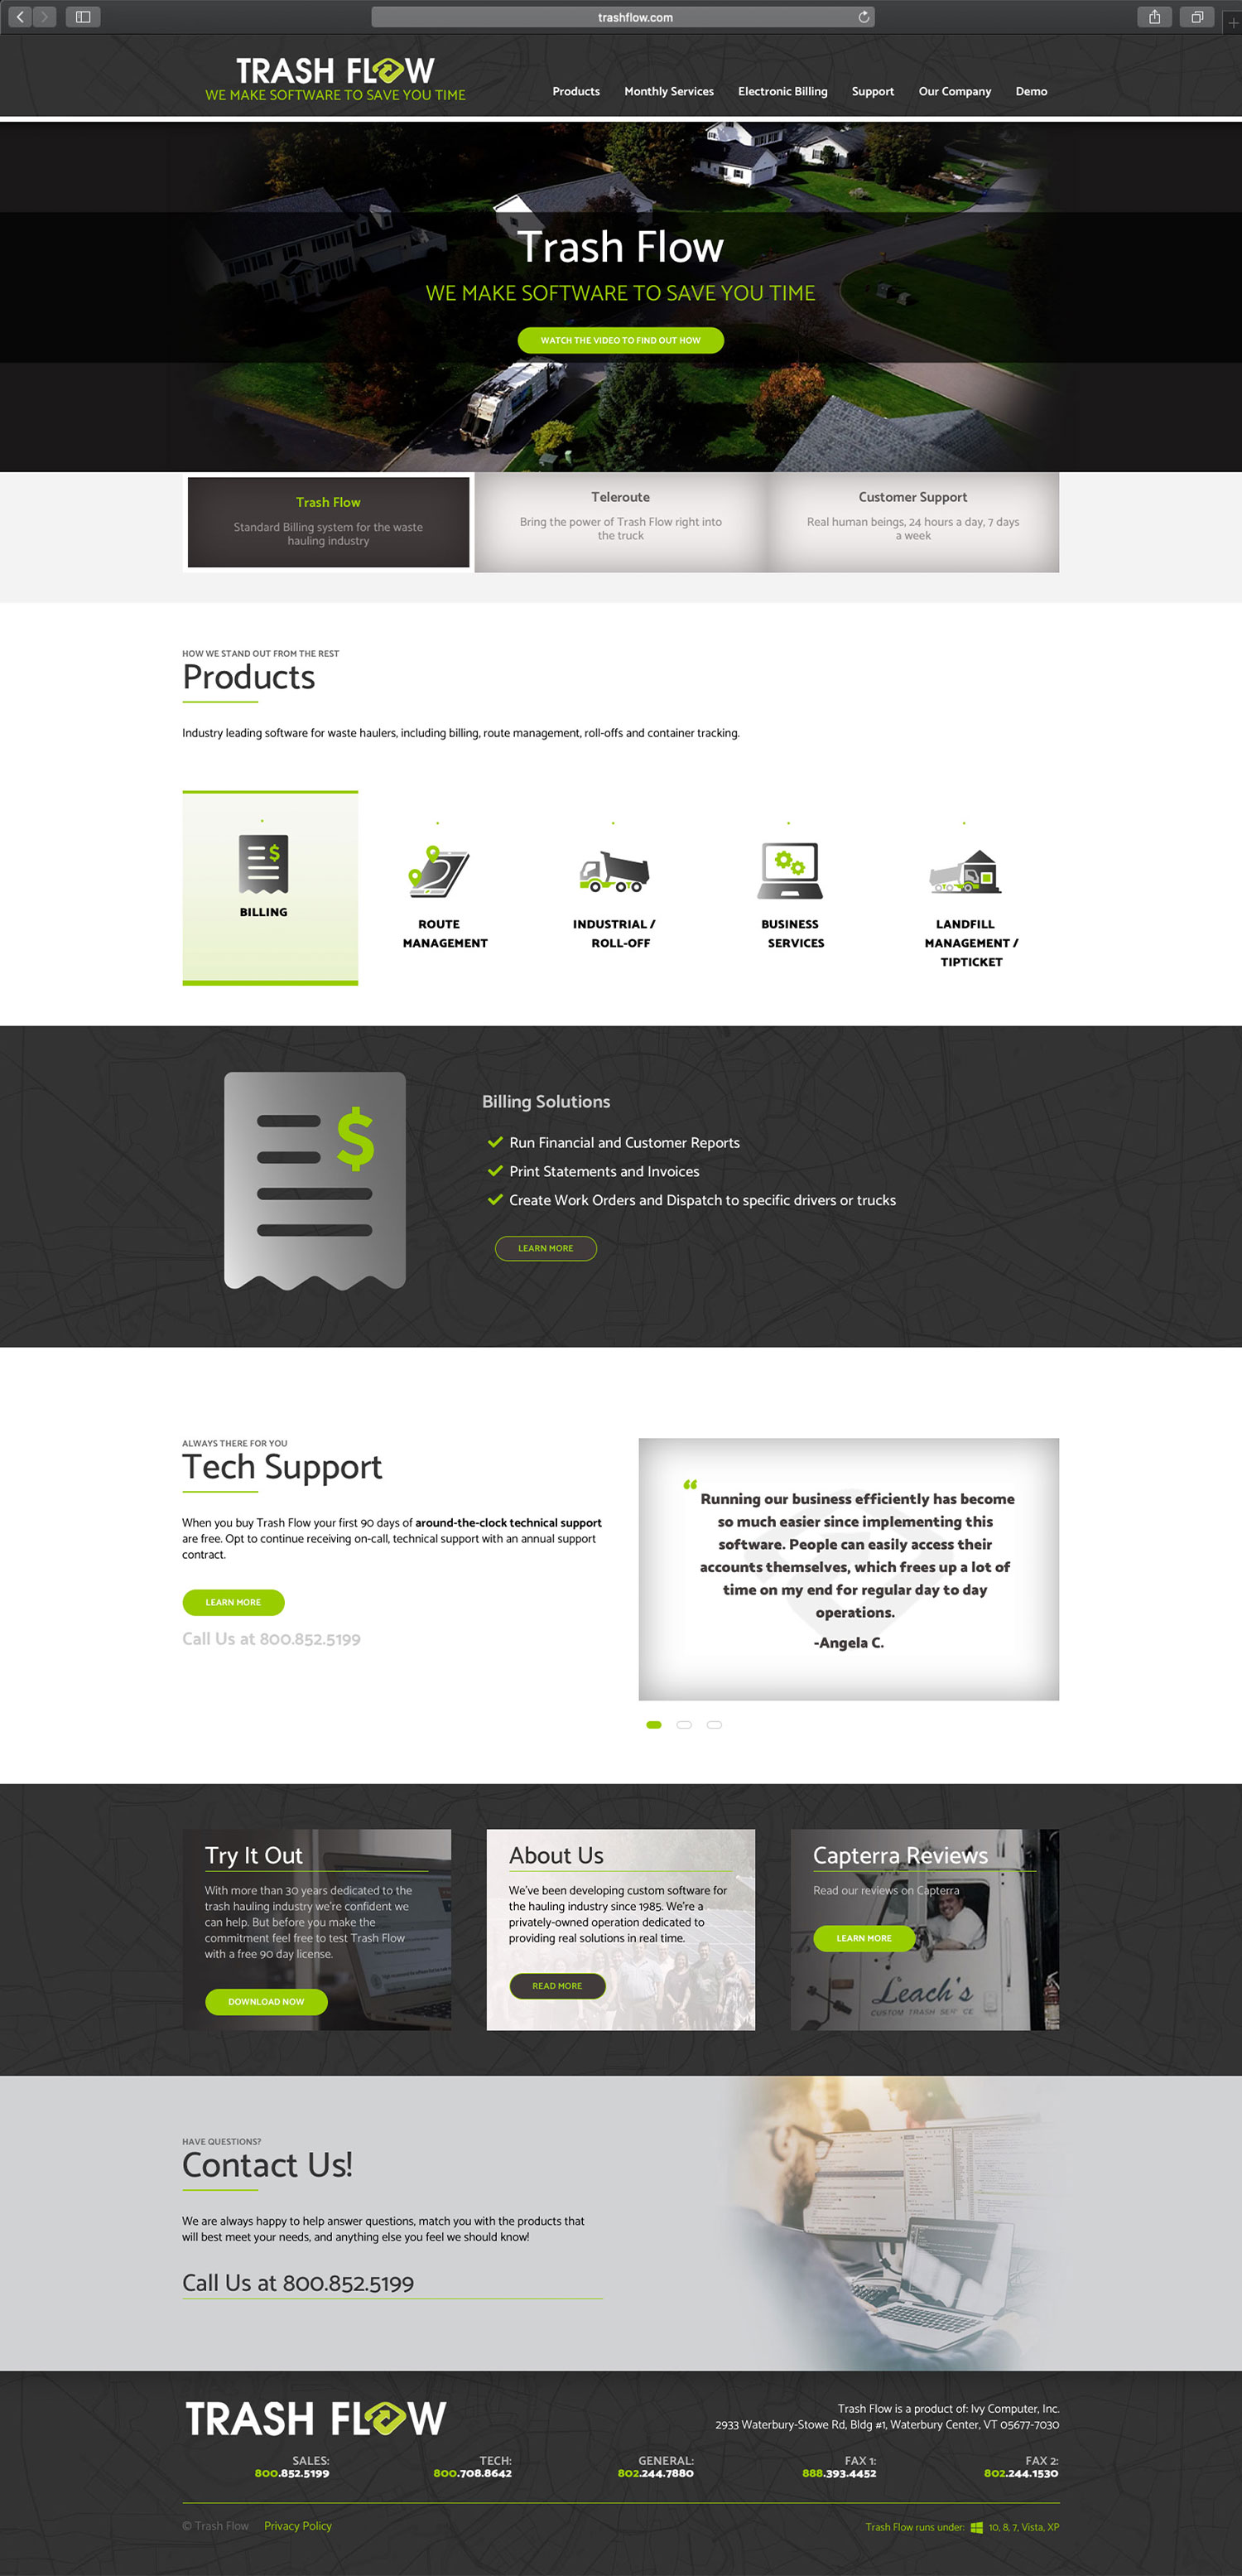 Website design and website development for client-replace - homepage view.